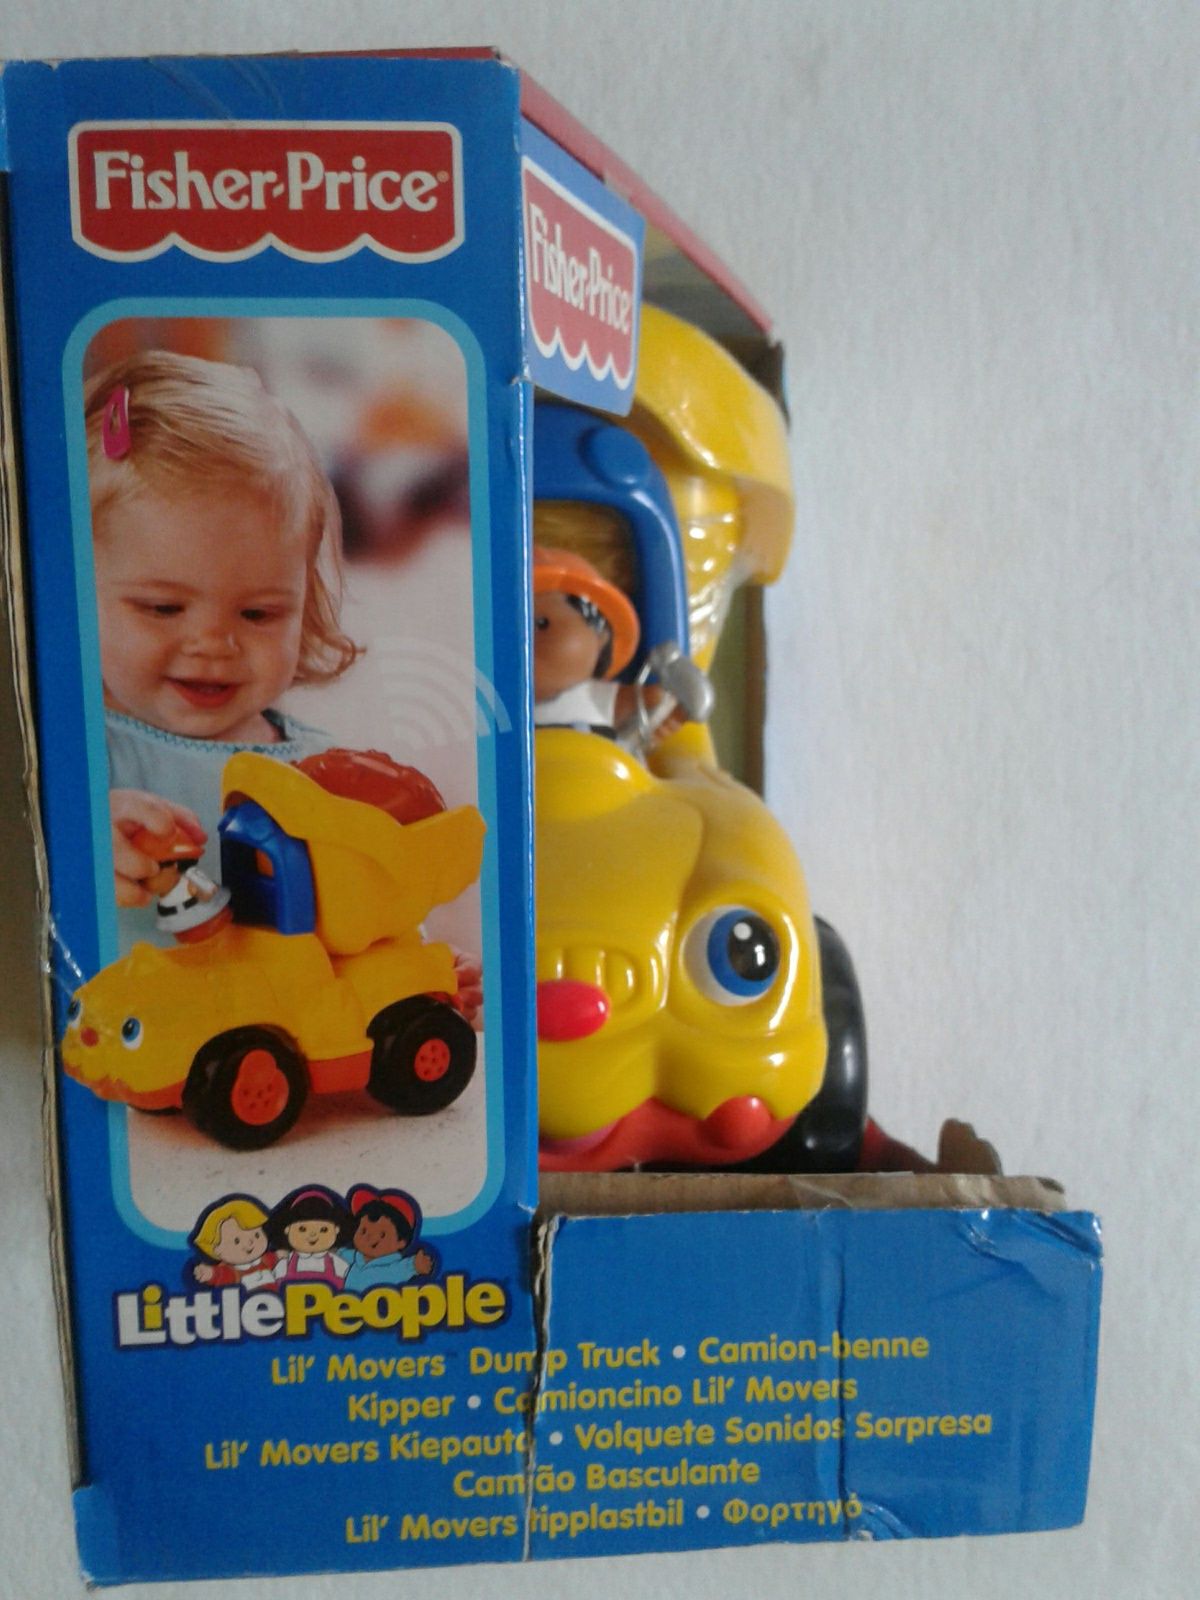 Camion Fisher Price Little People J0890, sunete&miscare, nou